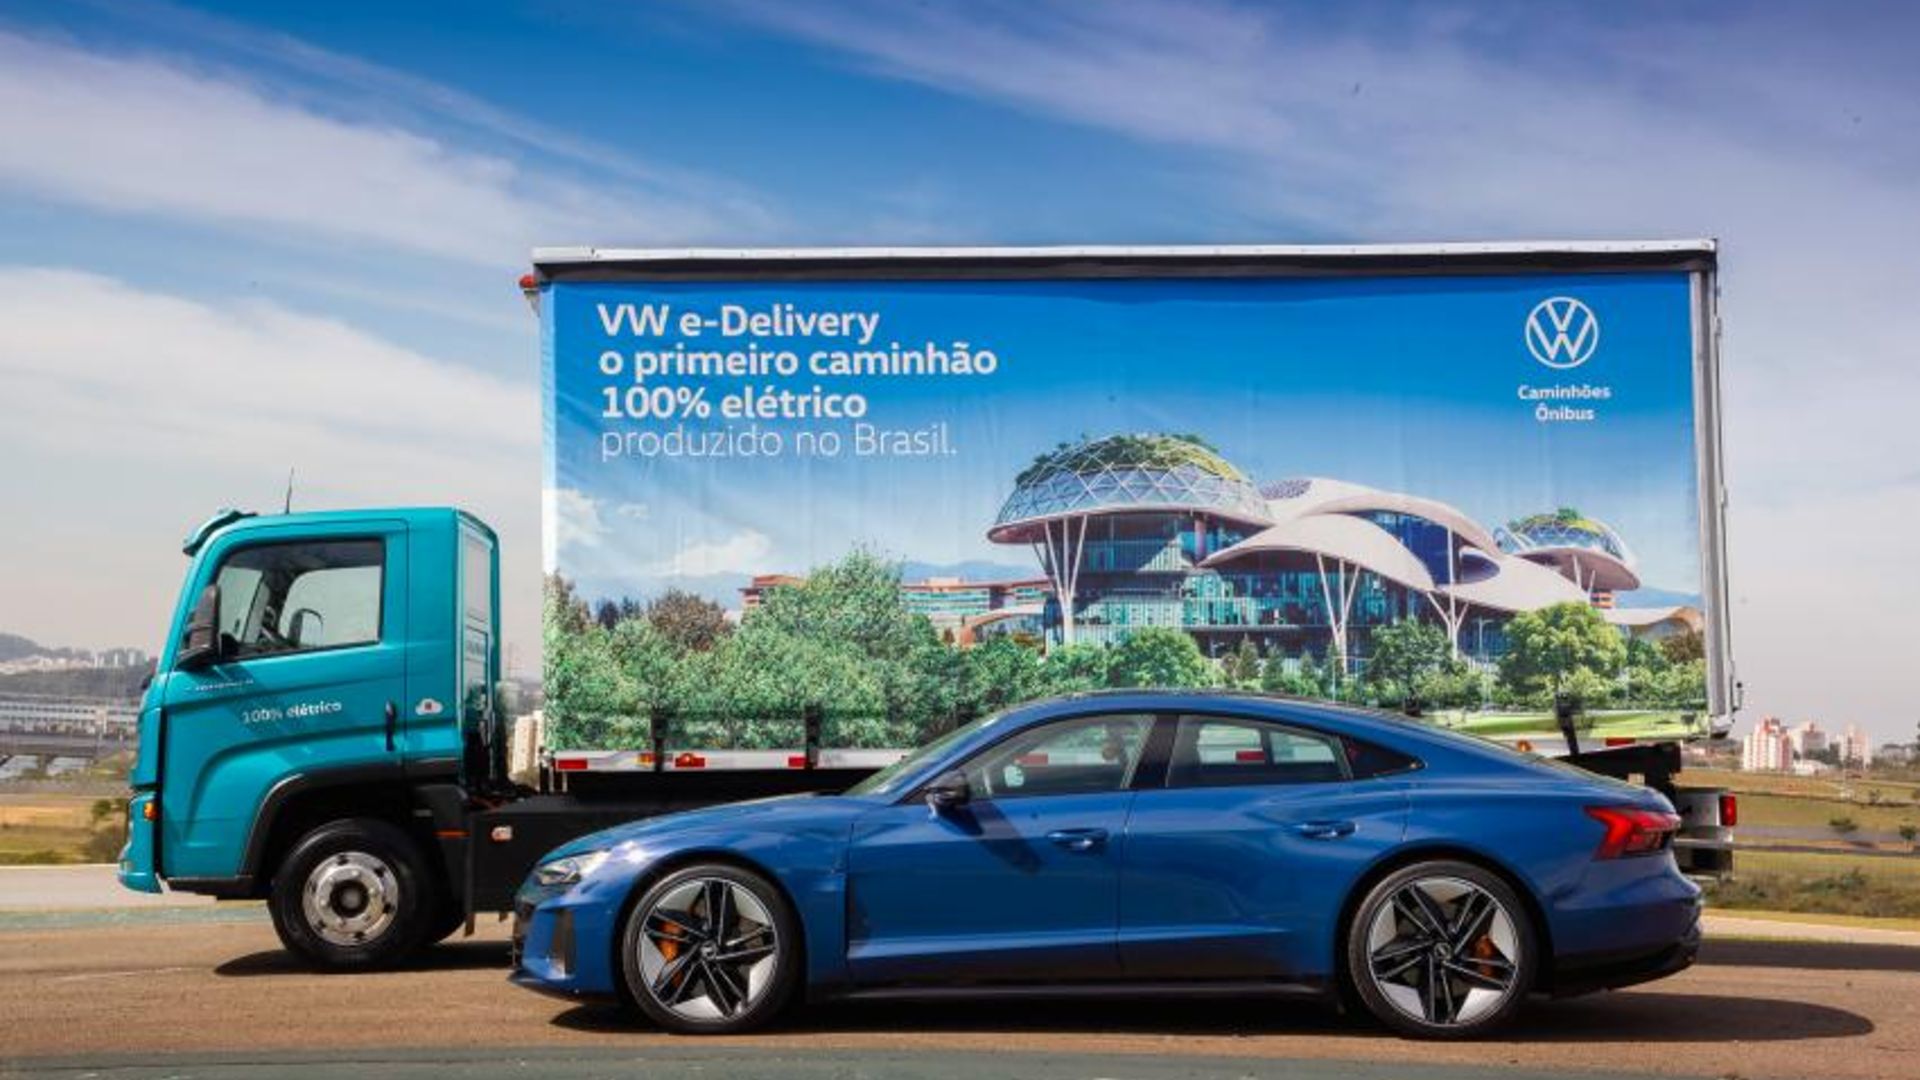 Volkswagen Truck & Bus and Audi will make the first 100% sustainable vehicle deliveries in Brazil